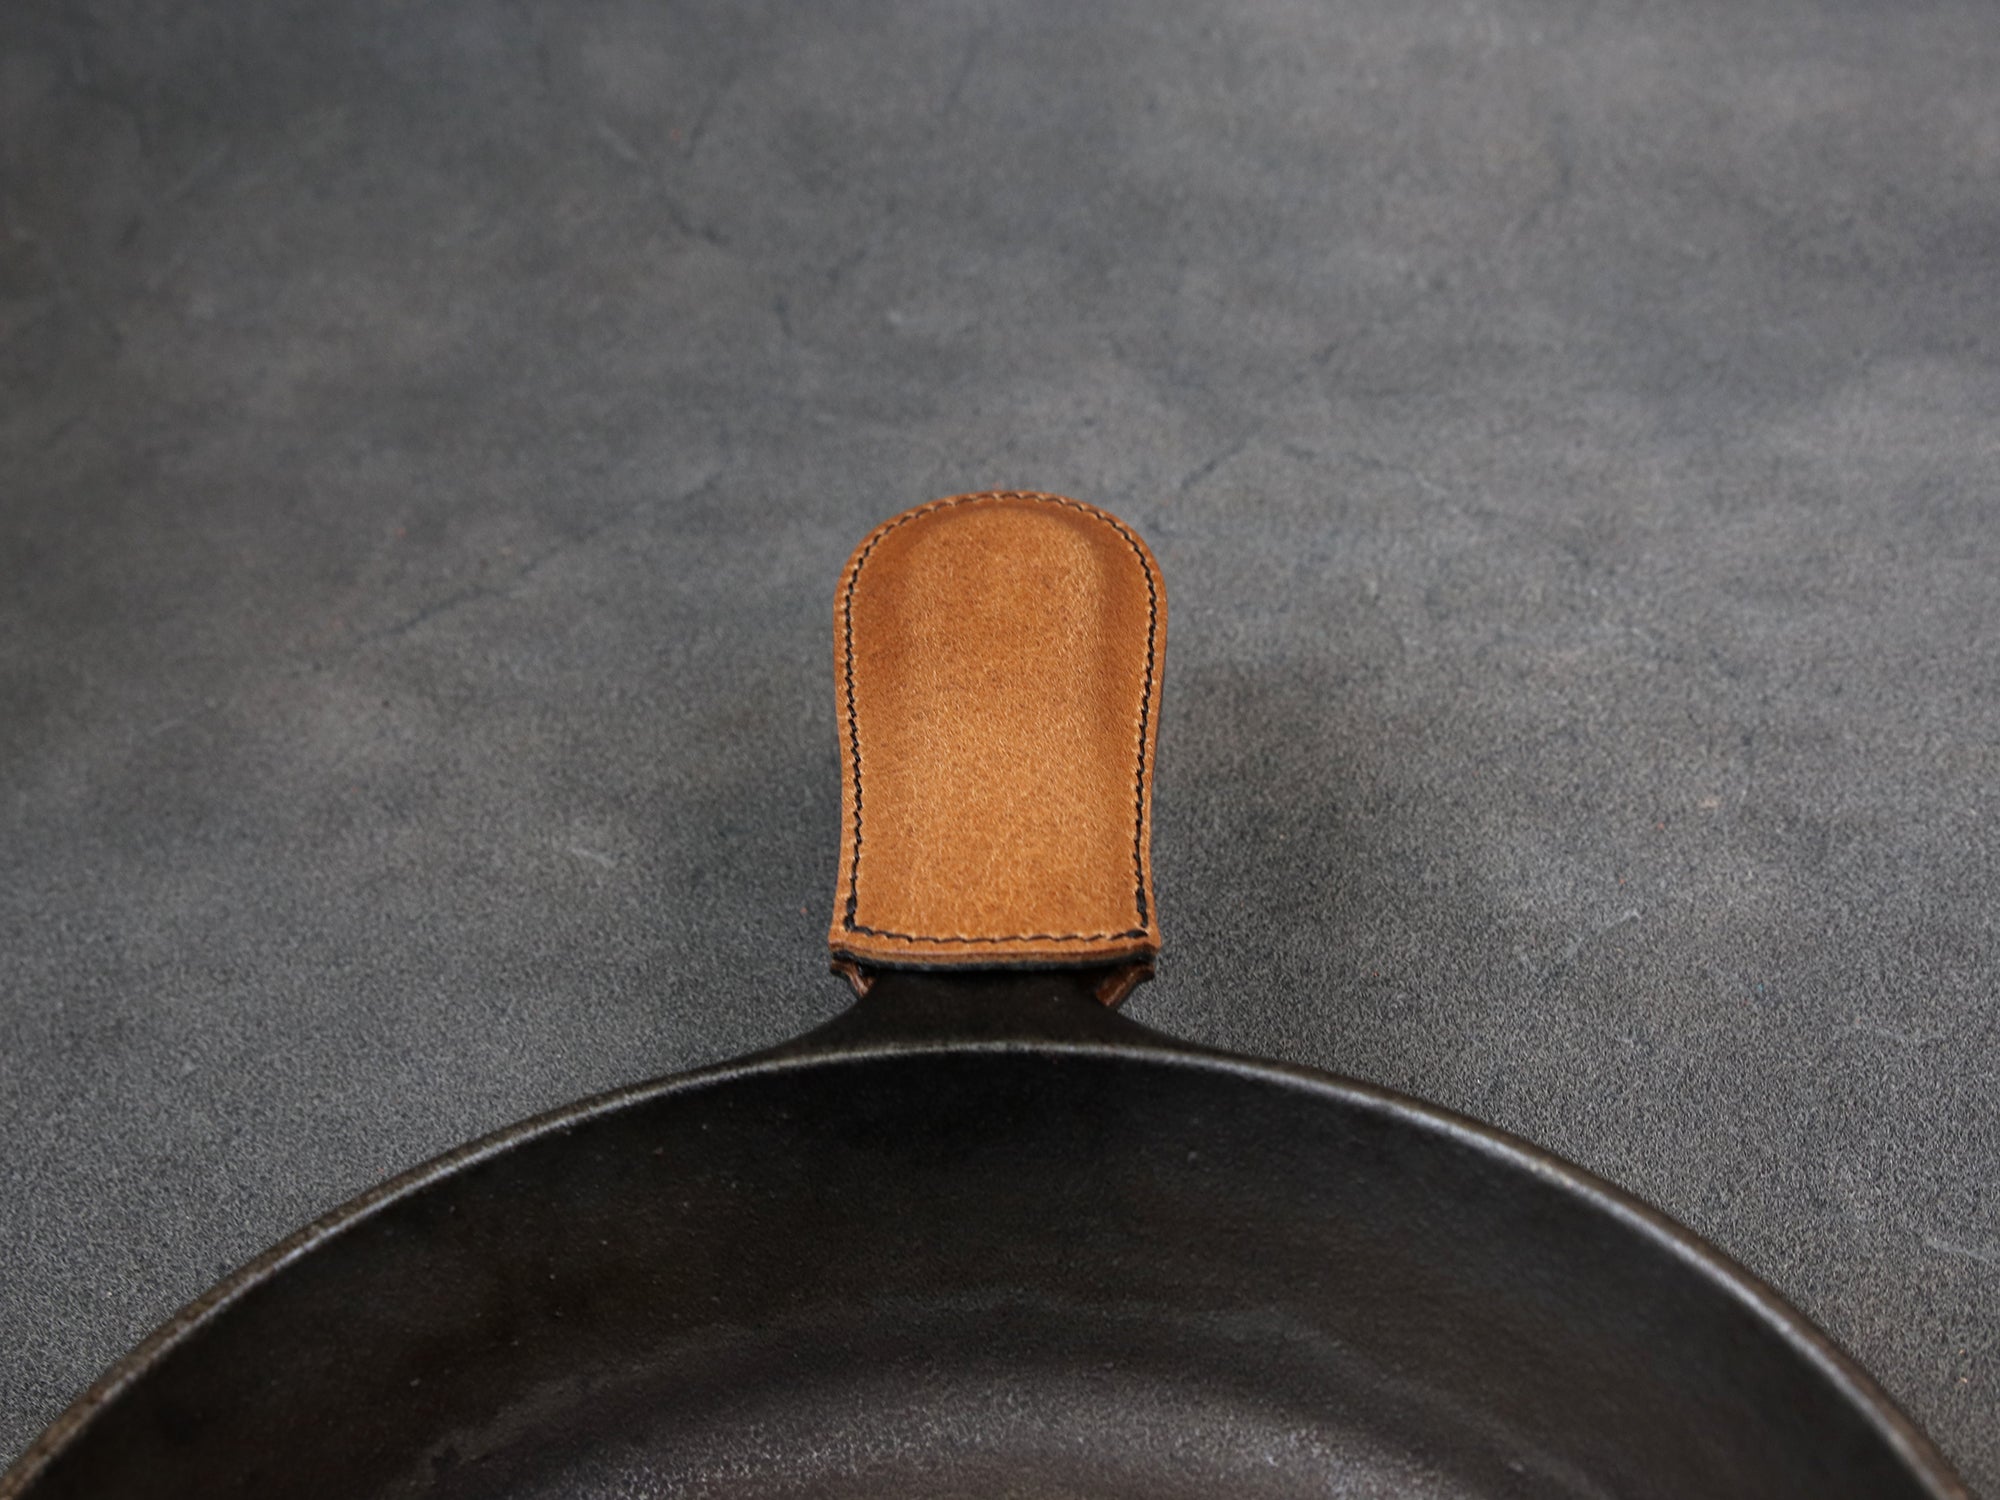 BTLUX Cast Iron Handle Cover, Set of 2 - Extra Thick Leather Heat Resistant  Handle Holder for Cast Iron Skillets, Pans - Made in Georgia